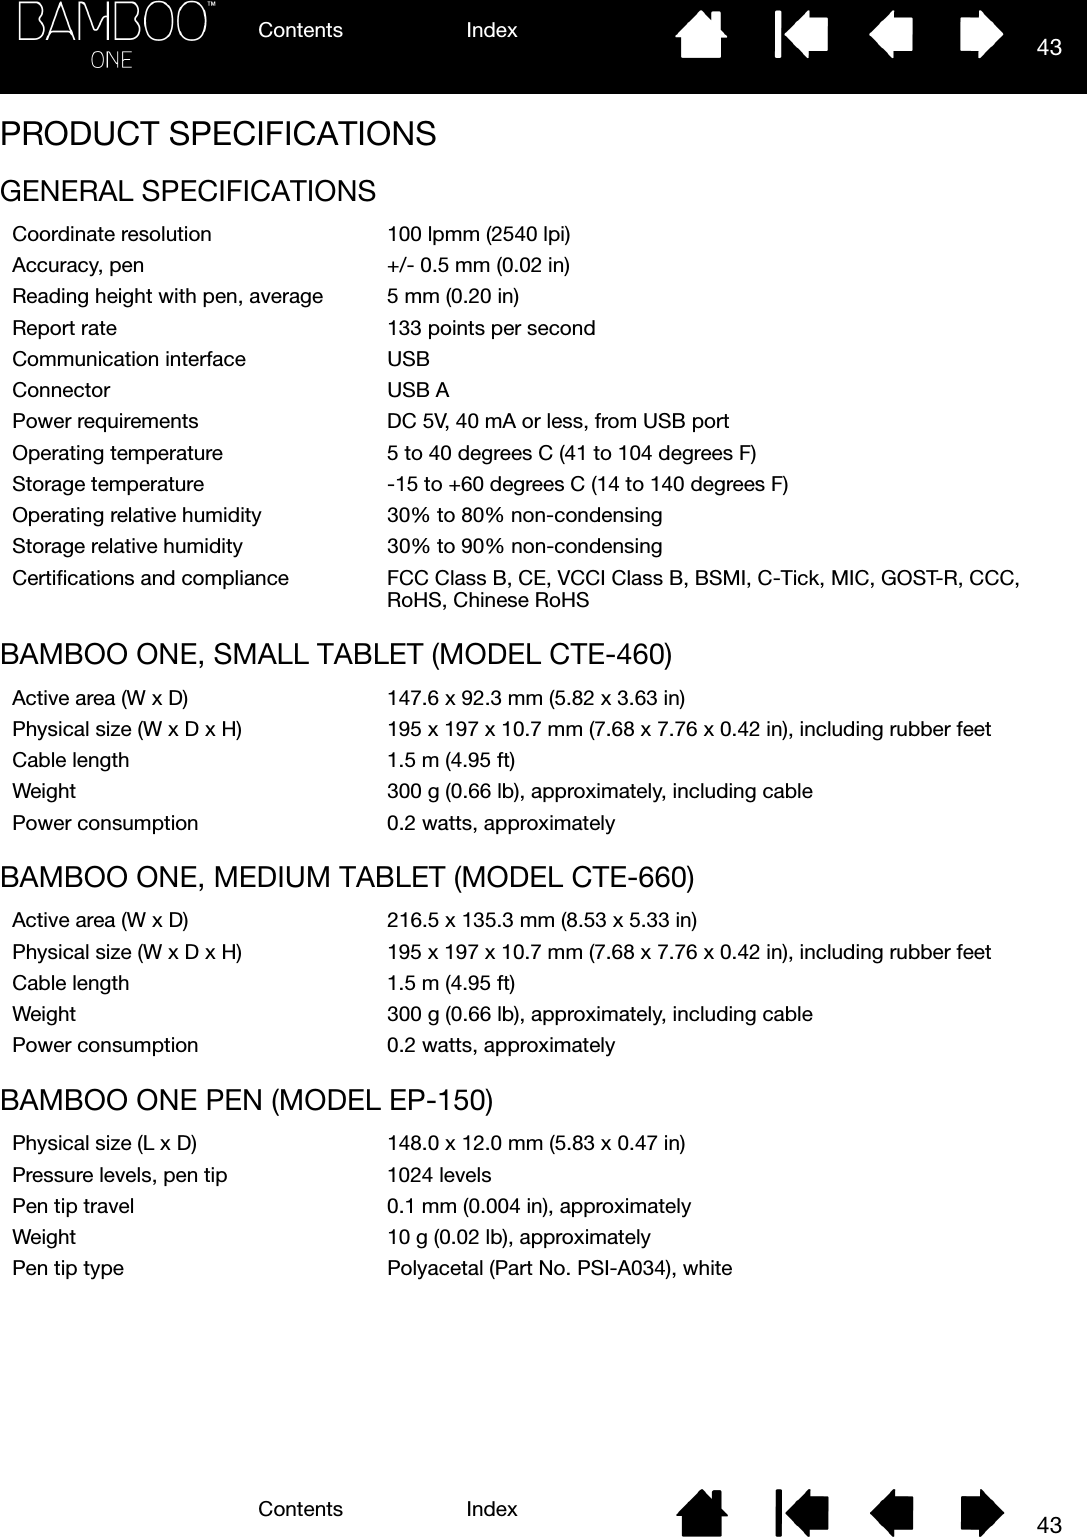 Contents IndexContents 43Index43PRODUCT SPECIFICATIONSGENERAL SPECIFICATIONSBAMBOO ONE, SMALL TABLET (MODEL CTE-460)BAMBOO ONE, MEDIUM TABLET (MODEL CTE-660)BAMBOO ONE PEN (MODEL EP-150)Coordinate resolution 100 lpmm (2540 lpi)Accuracy, pen +/- 0.5 mm (0.02 in)Reading height with pen, average 5 mm (0.20 in)Report rate 133 points per secondCommunication interface USBConnector USB APower requirements DC 5V, 40 mA or less, from USB portOperating temperature 5 to 40 degrees C (41 to 104 degrees F)Storage temperature -15 to +60 degrees C (14 to 140 degrees F)Operating relative humidity 30% to 80% non-condensingStorage relative humidity 30% to 90% non-condensingCertifications and compliance FCC Class B, CE, VCCI Class B, BSMI, C-Tick, MIC, GOST-R, CCC, RoHS, Chinese RoHSActive area (W x D) 147.6 x 92.3 mm (5.82 x 3.63 in)Physical size (W x D x H) 195 x 197 x 10.7 mm (7.68 x 7.76 x 0.42 in), including rubber feetCable length 1.5 m (4.95 ft)Weight 300 g (0.66 lb), approximately, including cablePower consumption 0.2 watts, approximatelyActive area (W x D) 216.5 x 135.3 mm (8.53 x 5.33 in)Physical size (W x D x H) 195 x 197 x 10.7 mm (7.68 x 7.76 x 0.42 in), including rubber feetCable length 1.5 m (4.95 ft)Weight 300 g (0.66 lb), approximately, including cablePower consumption 0.2 watts, approximatelyPhysical size (L x D) 148.0 x 12.0 mm (5.83 x 0.47 in)Pressure levels, pen tip 1024 levelsPen tip travel 0.1 mm (0.004 in), approximatelyWeight 10 g (0.02 lb), approximatelyPen tip type Polyacetal (Part No. PSI-A034), white